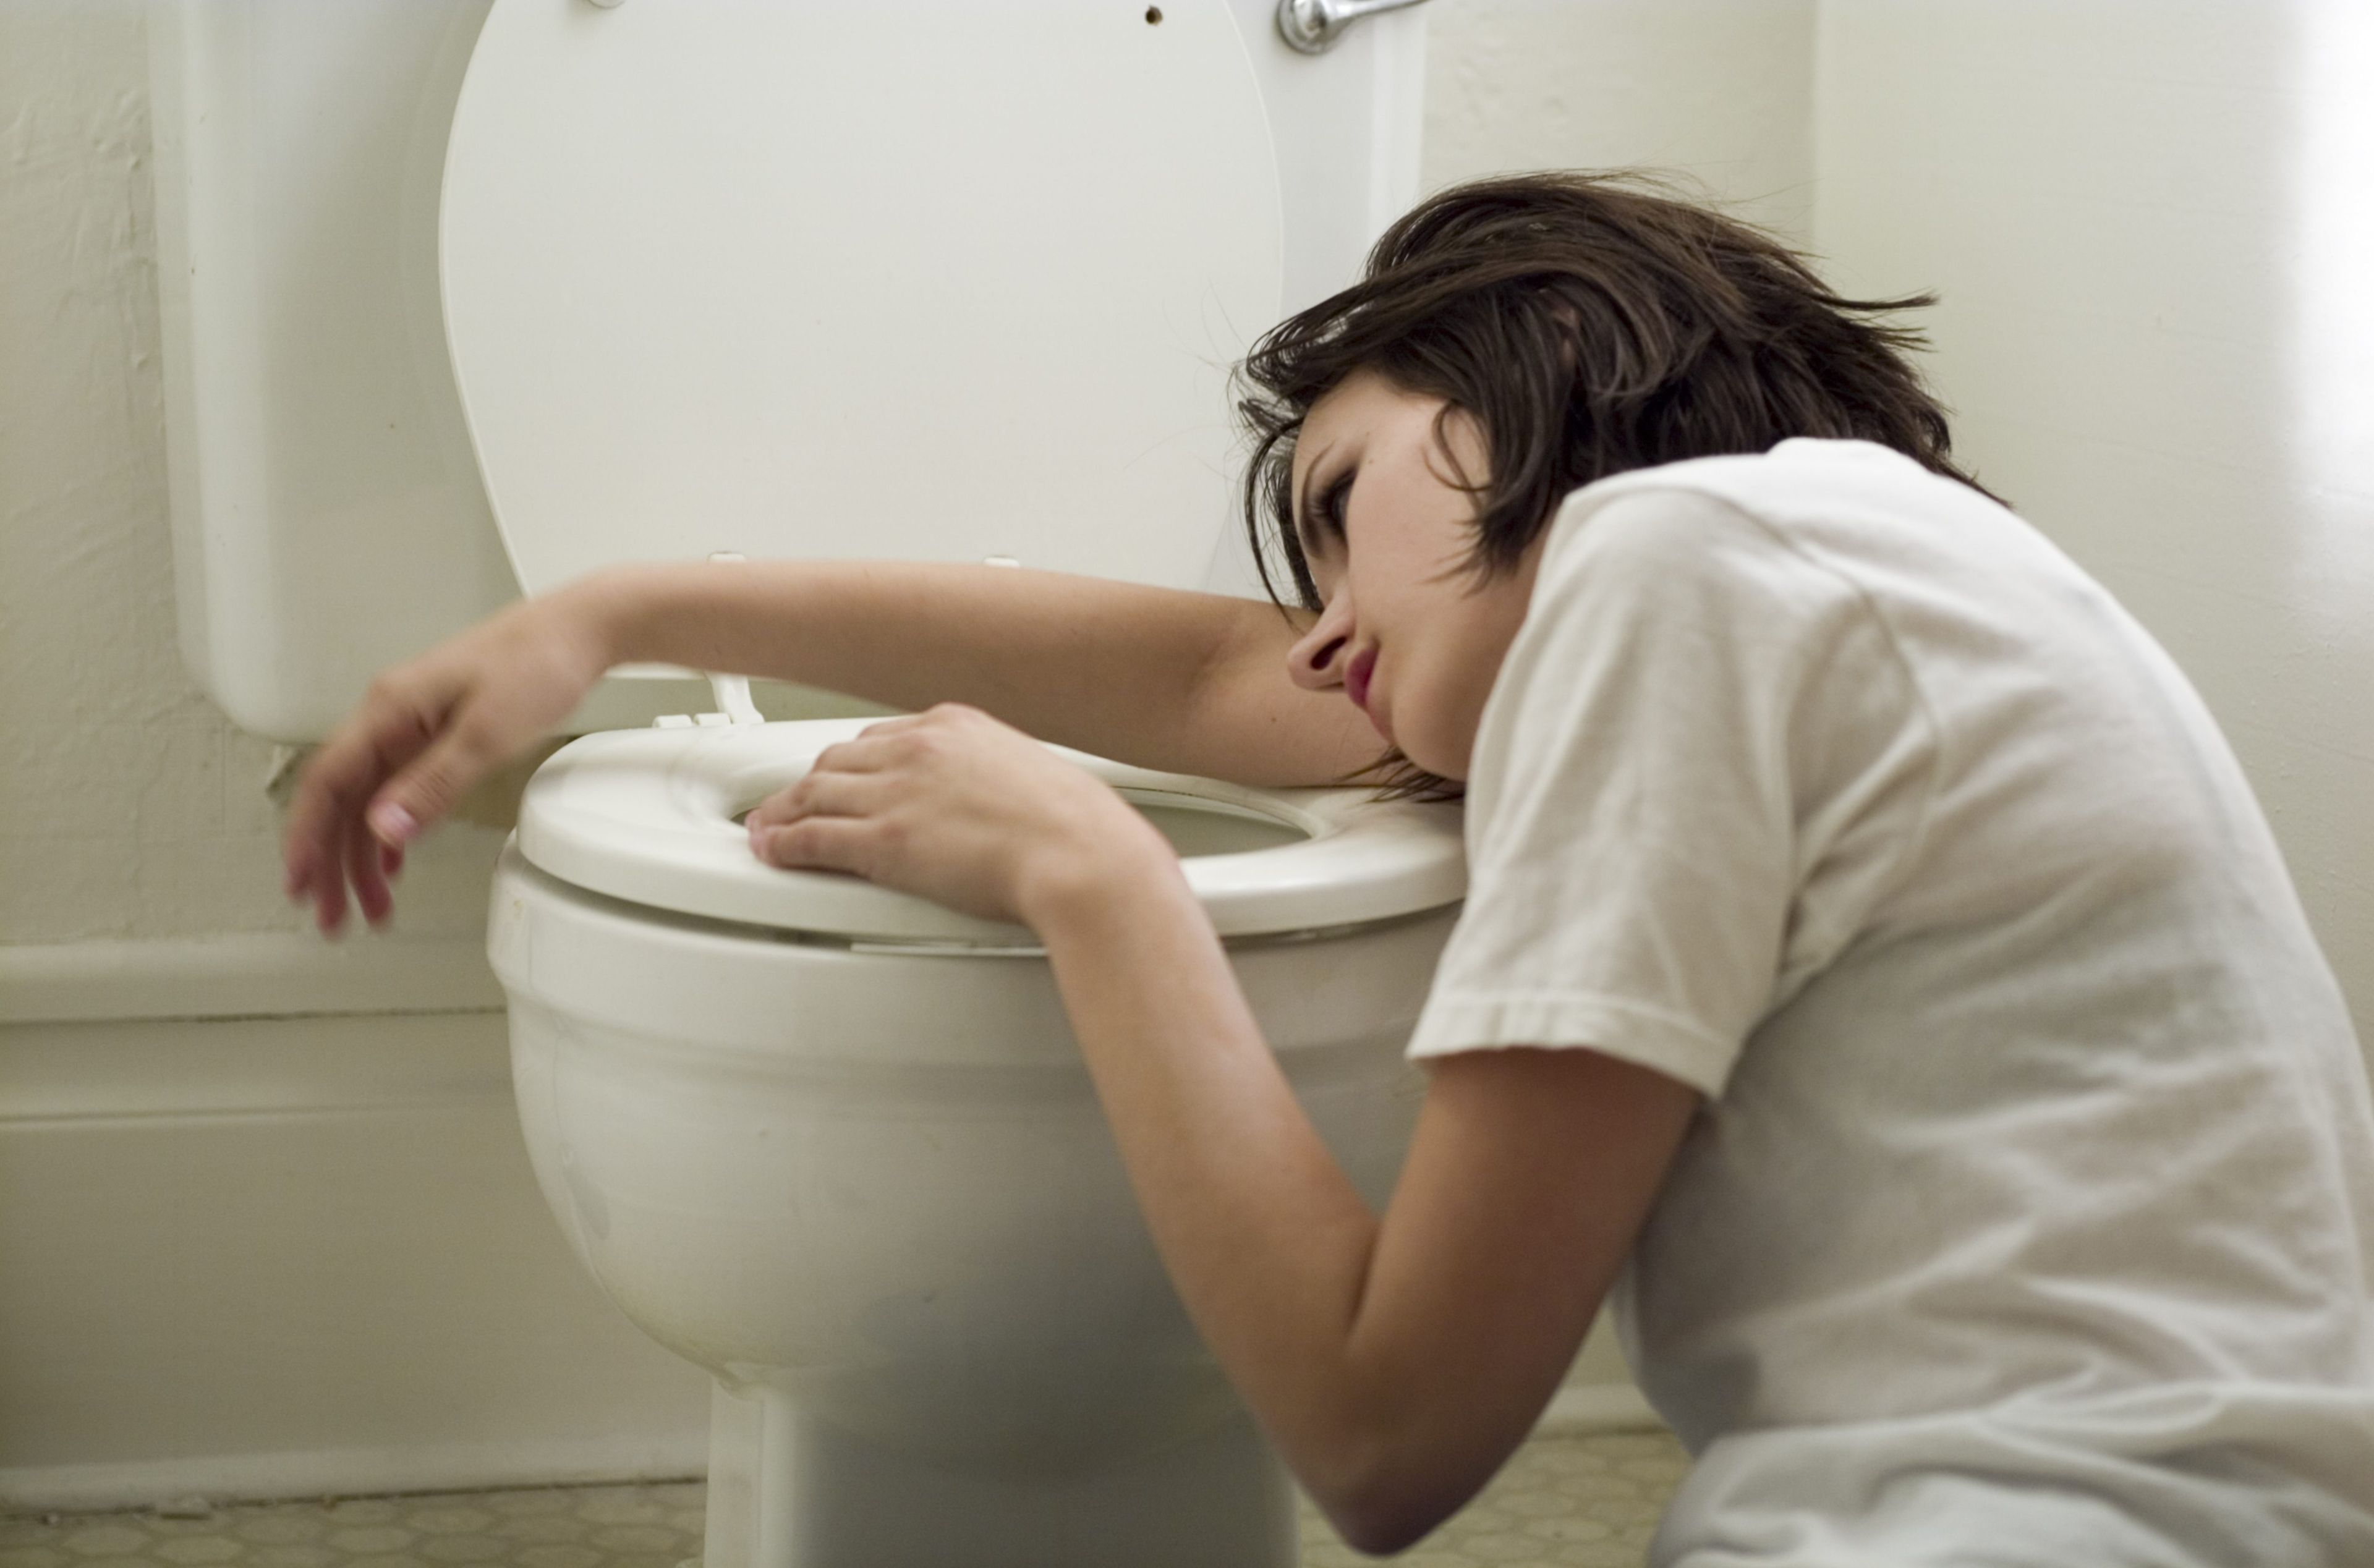 Sick young woman leaning on toilet bowl